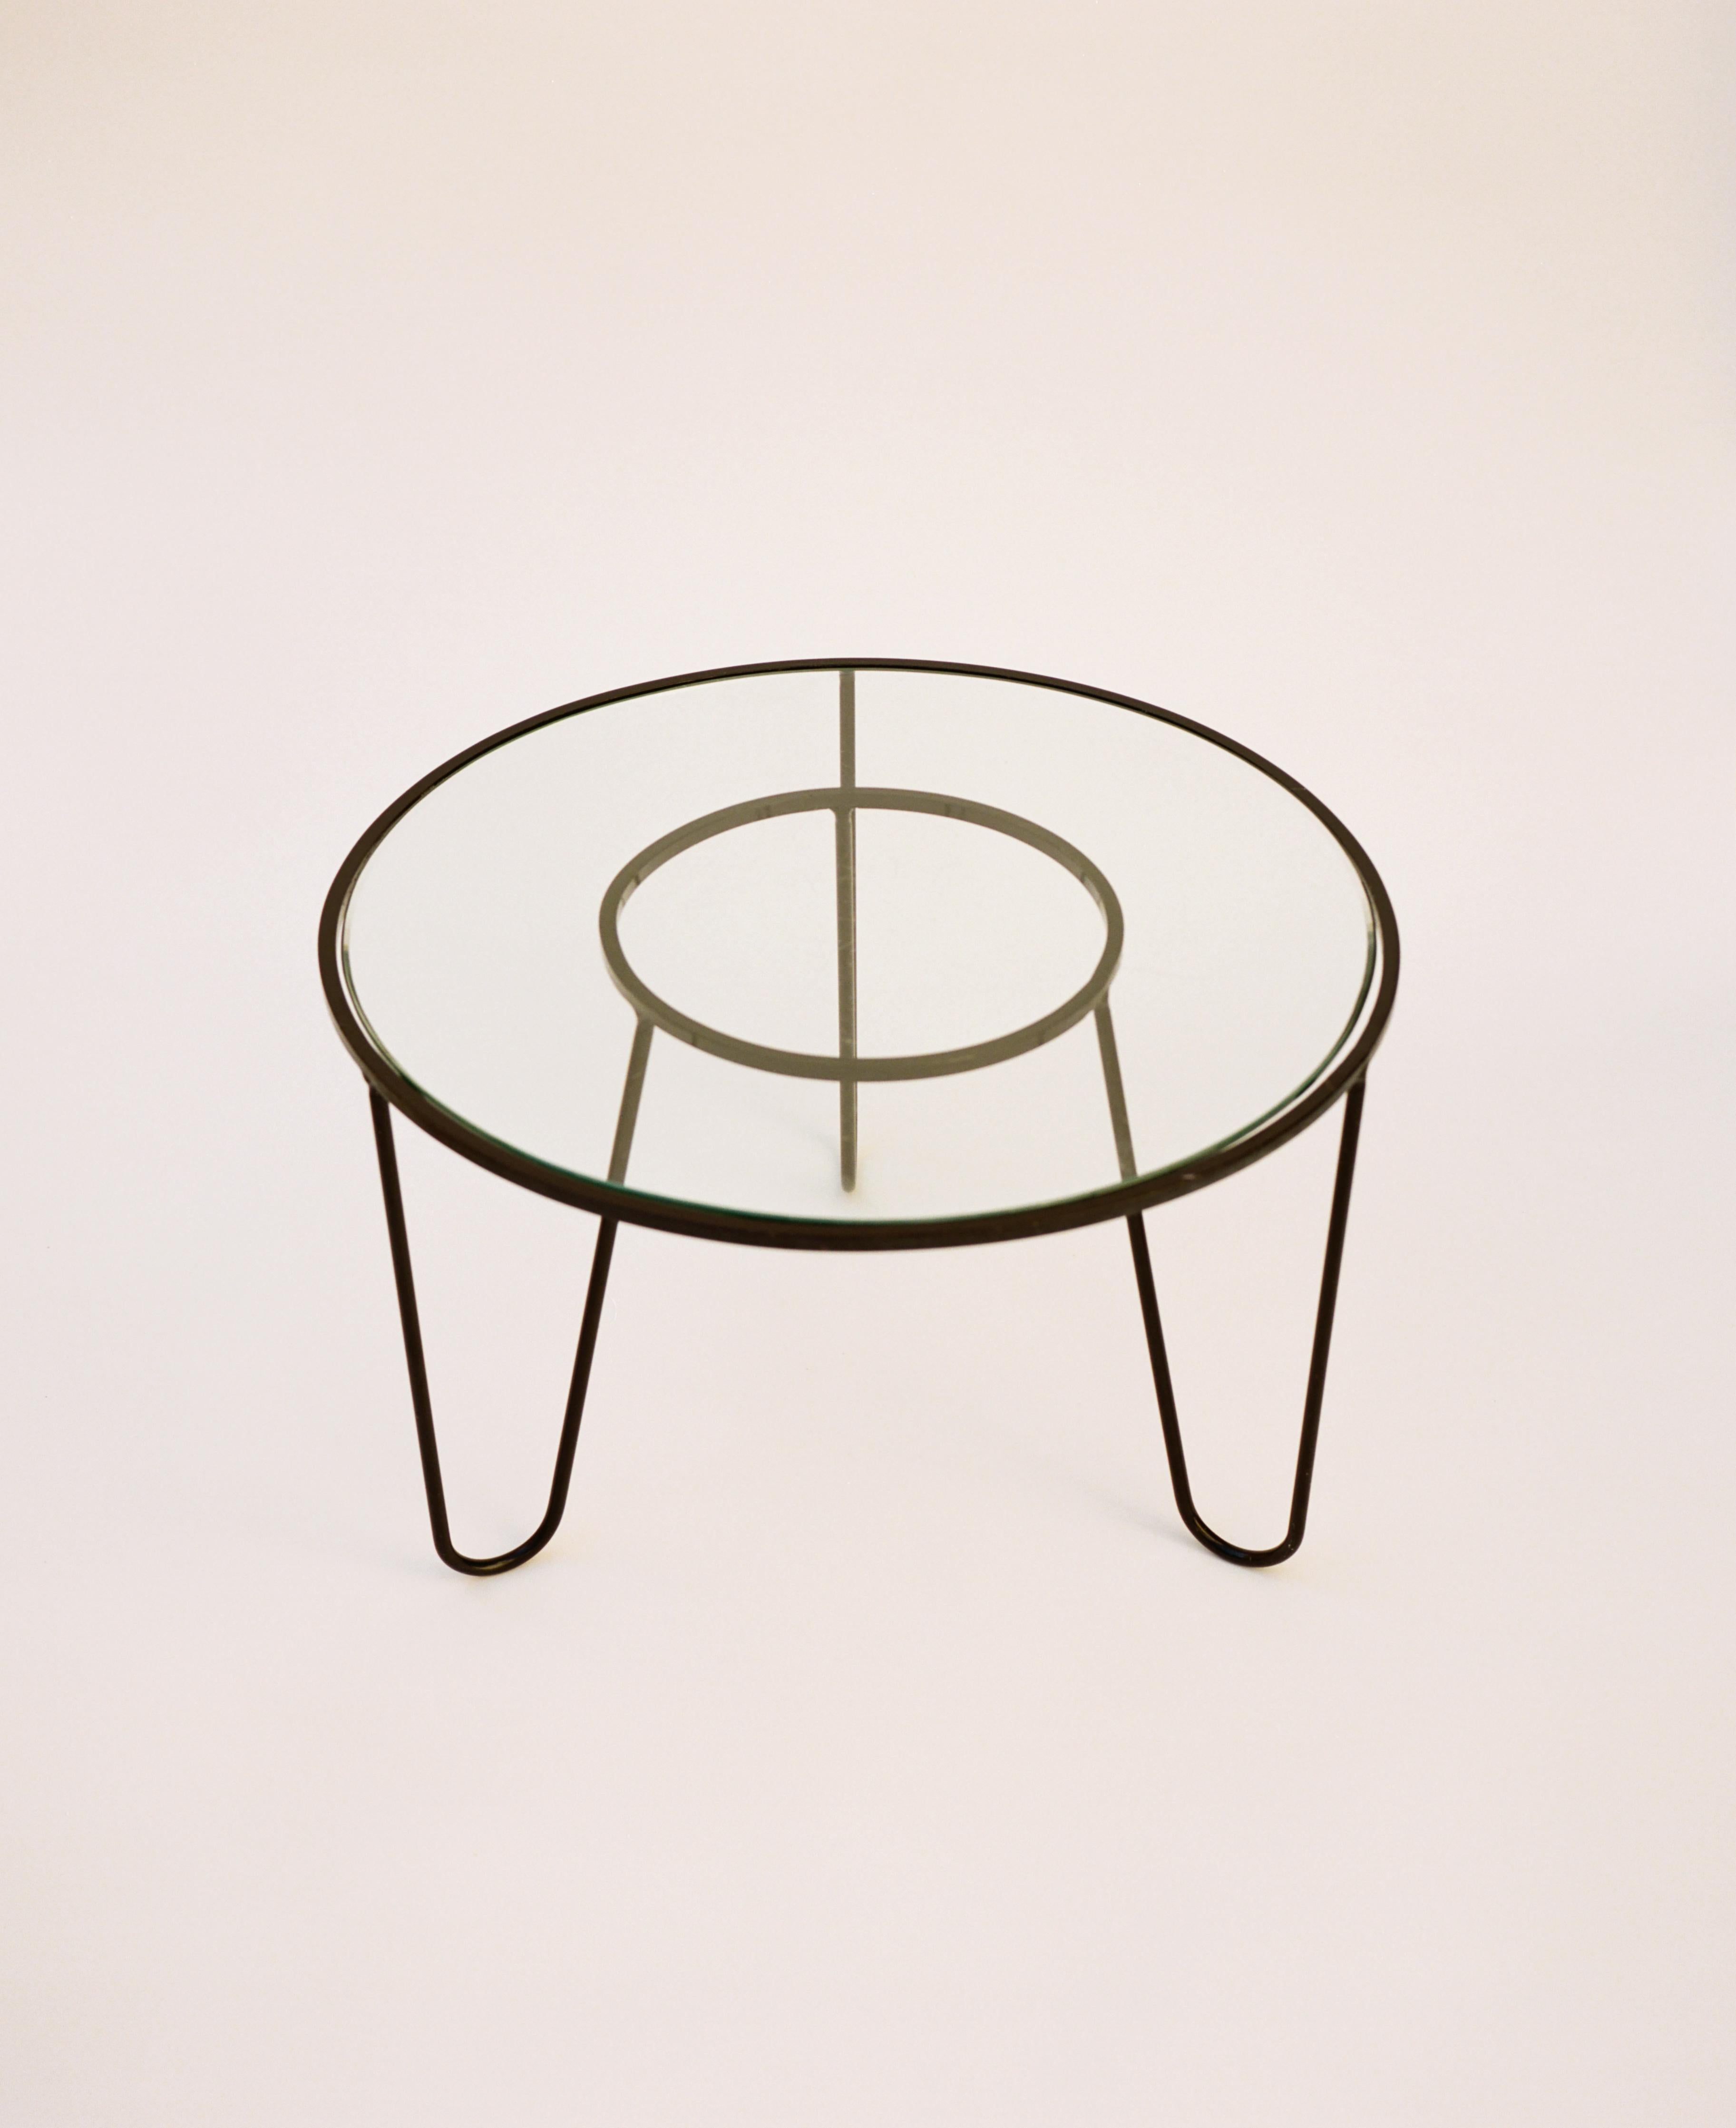 ‘Bellevue’ table designed by Mathieu Matégot in 1956. Enameled metal base and a round, beveled-edge glass top. Born in Hungary, Matégot became a naturalized French citizen in 1931 and volunteered in WWII. In the early 1940s he was captured and lived